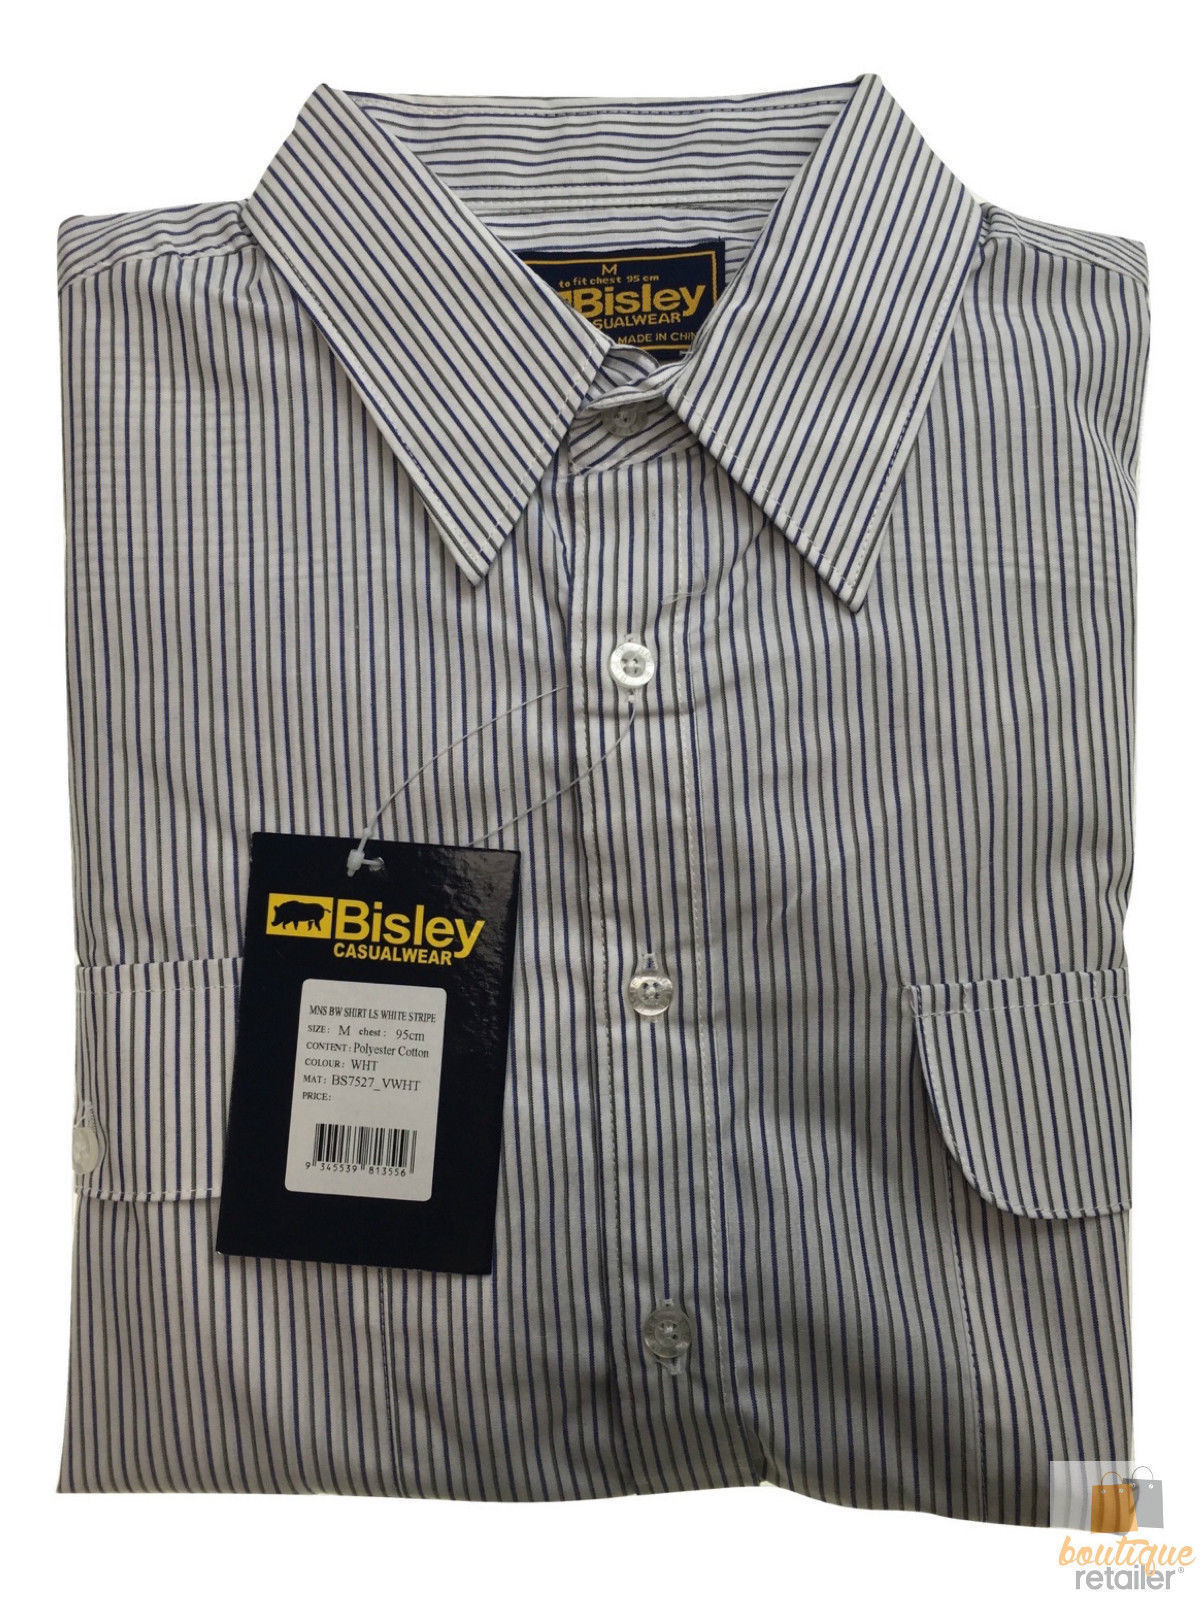 BISLEY LONG SLEEVE SHIRT Everyday Casual Business Work Cotton Blend ...